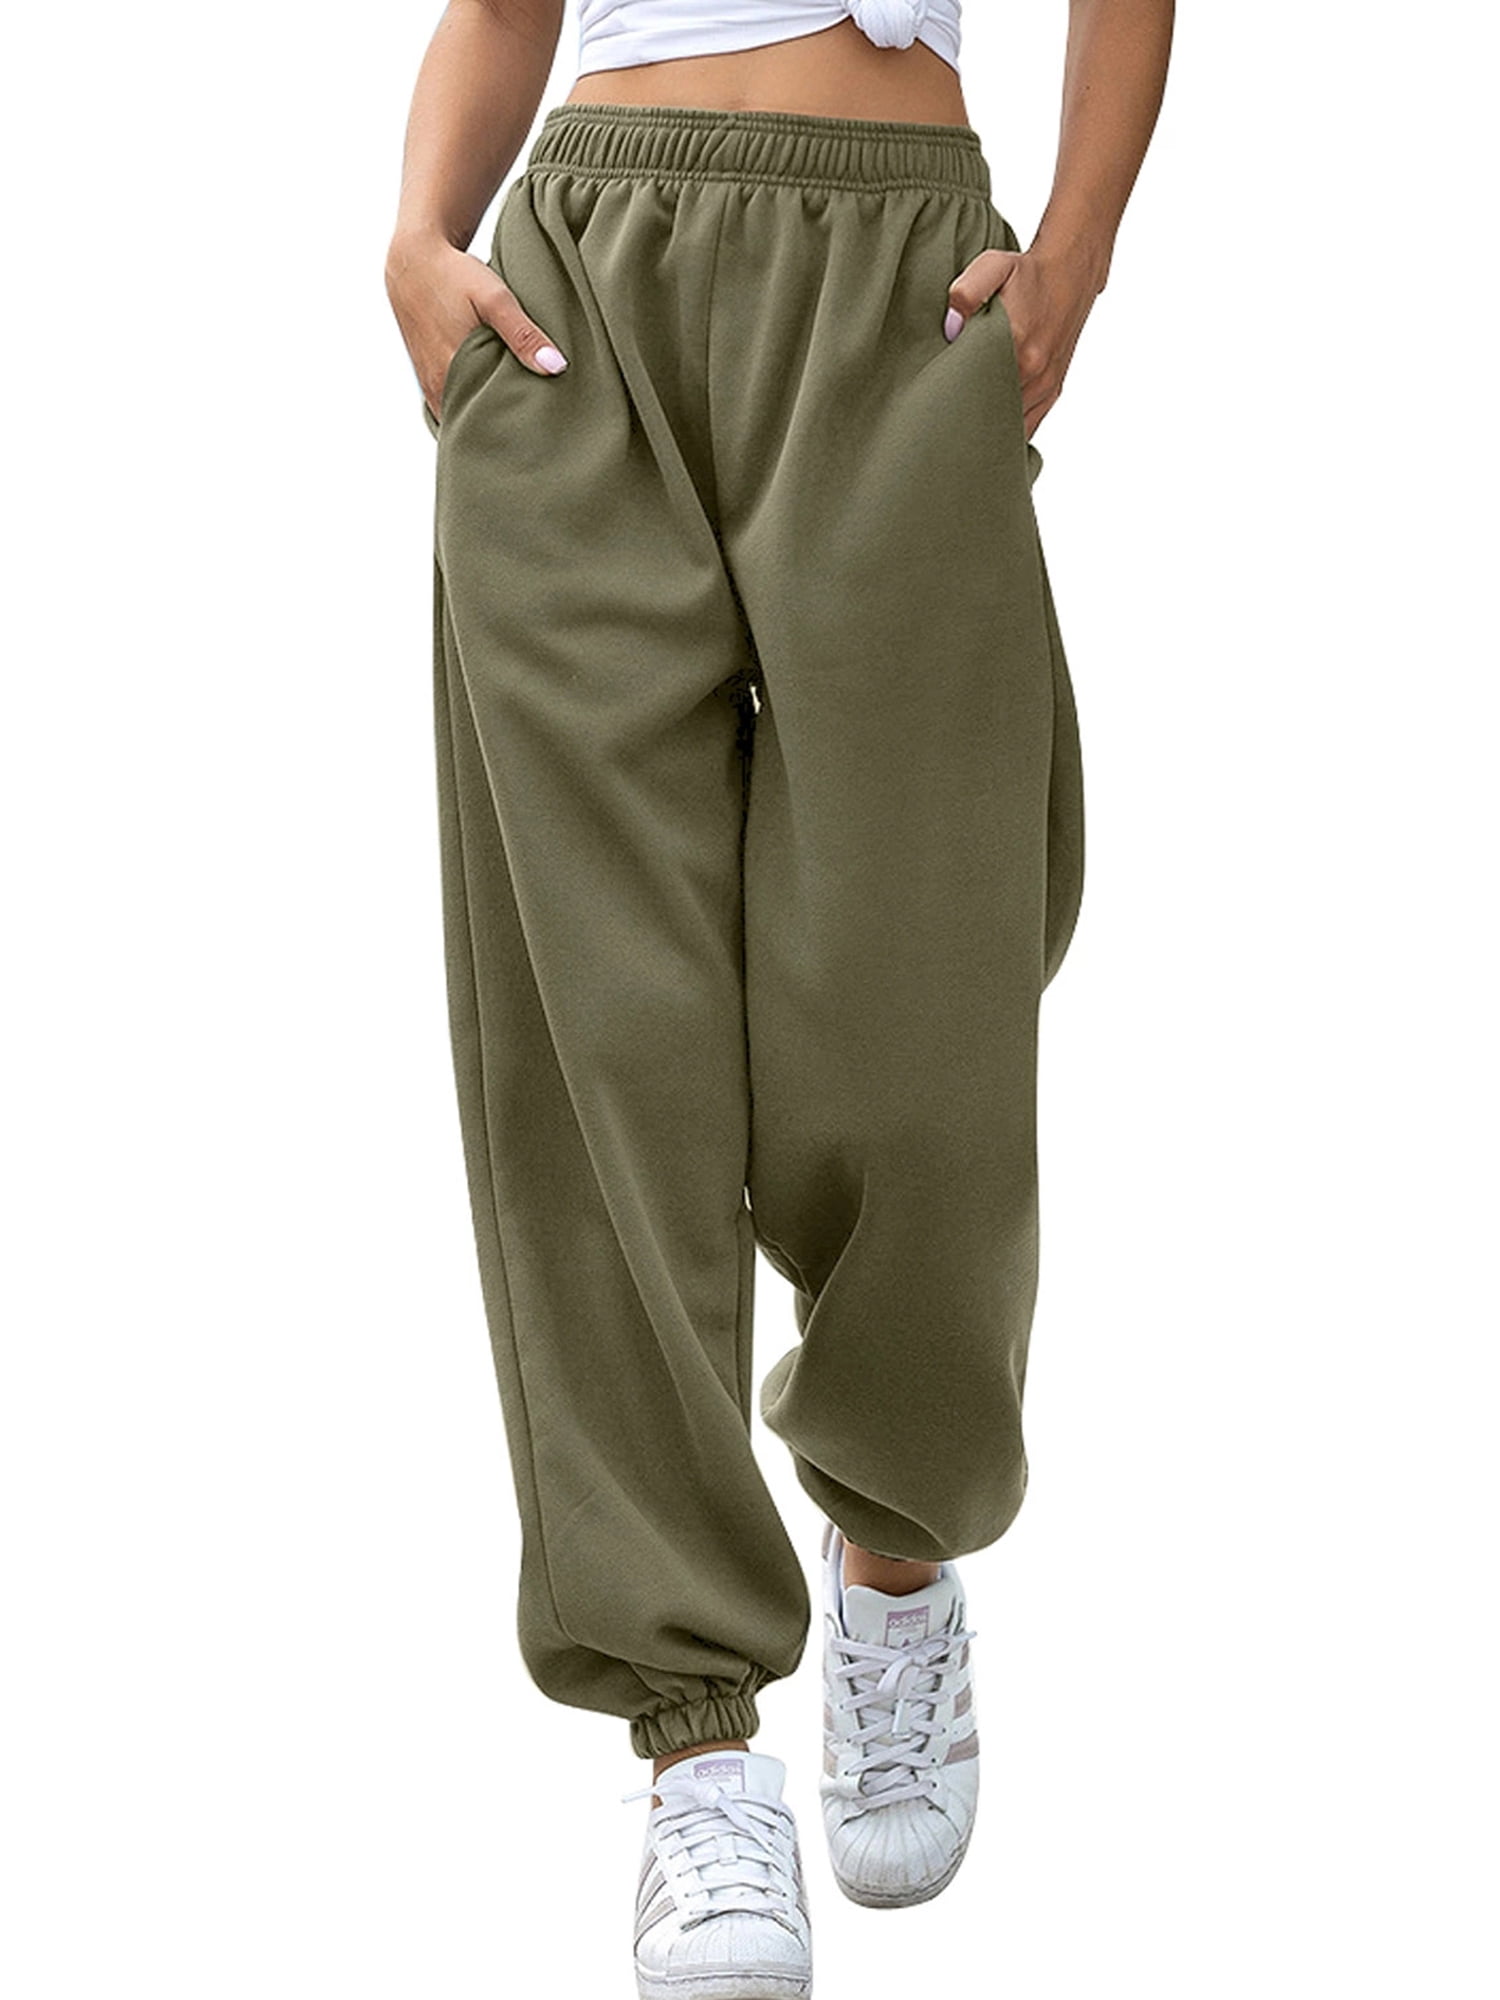 Womens Quick Dry Drawstring Yoga Dance Jogger Pants For Sports And Fitness  Ck1074 From Play_sports, $21.49